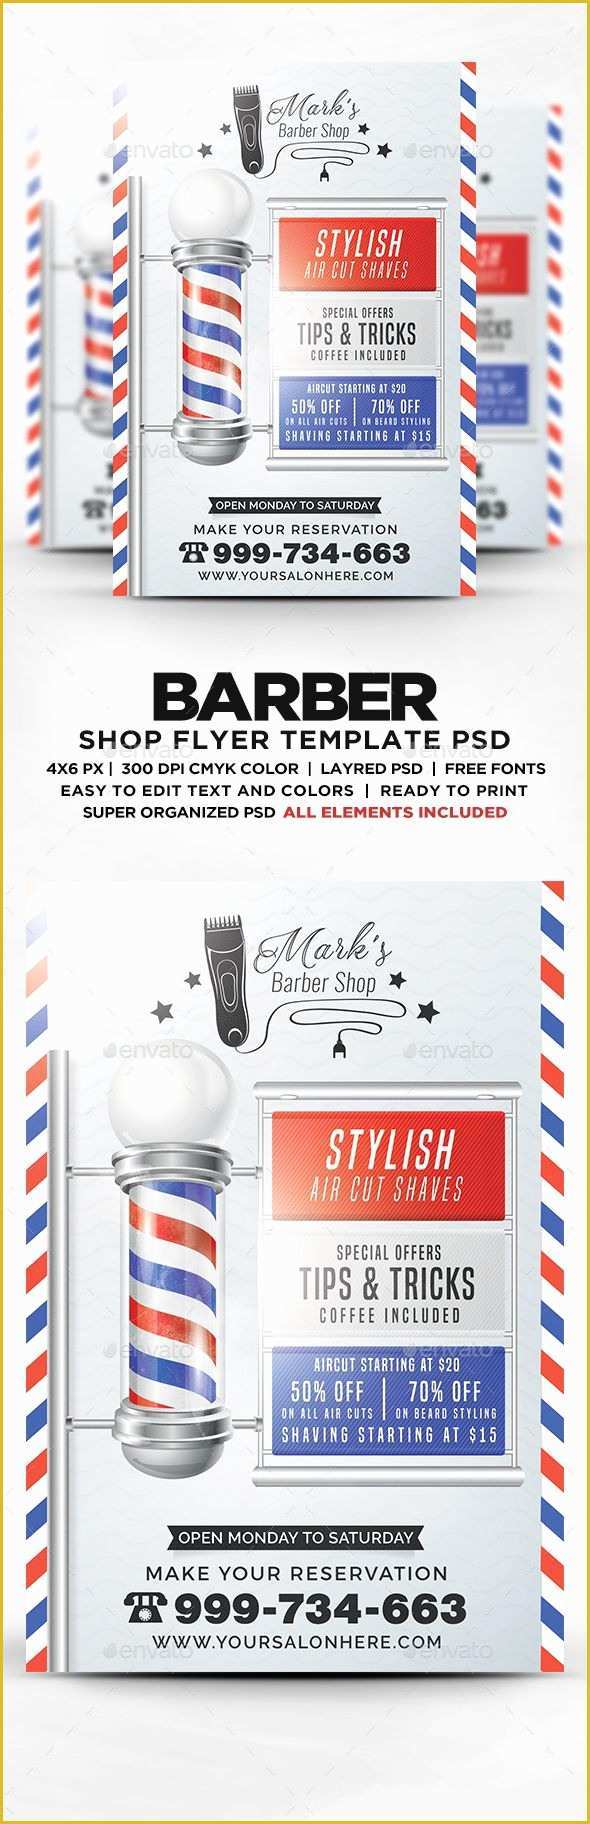 Free Barber Shop Template Psd Of 23 Best 20 Barber Shop Flyer Template Psd Indesign and